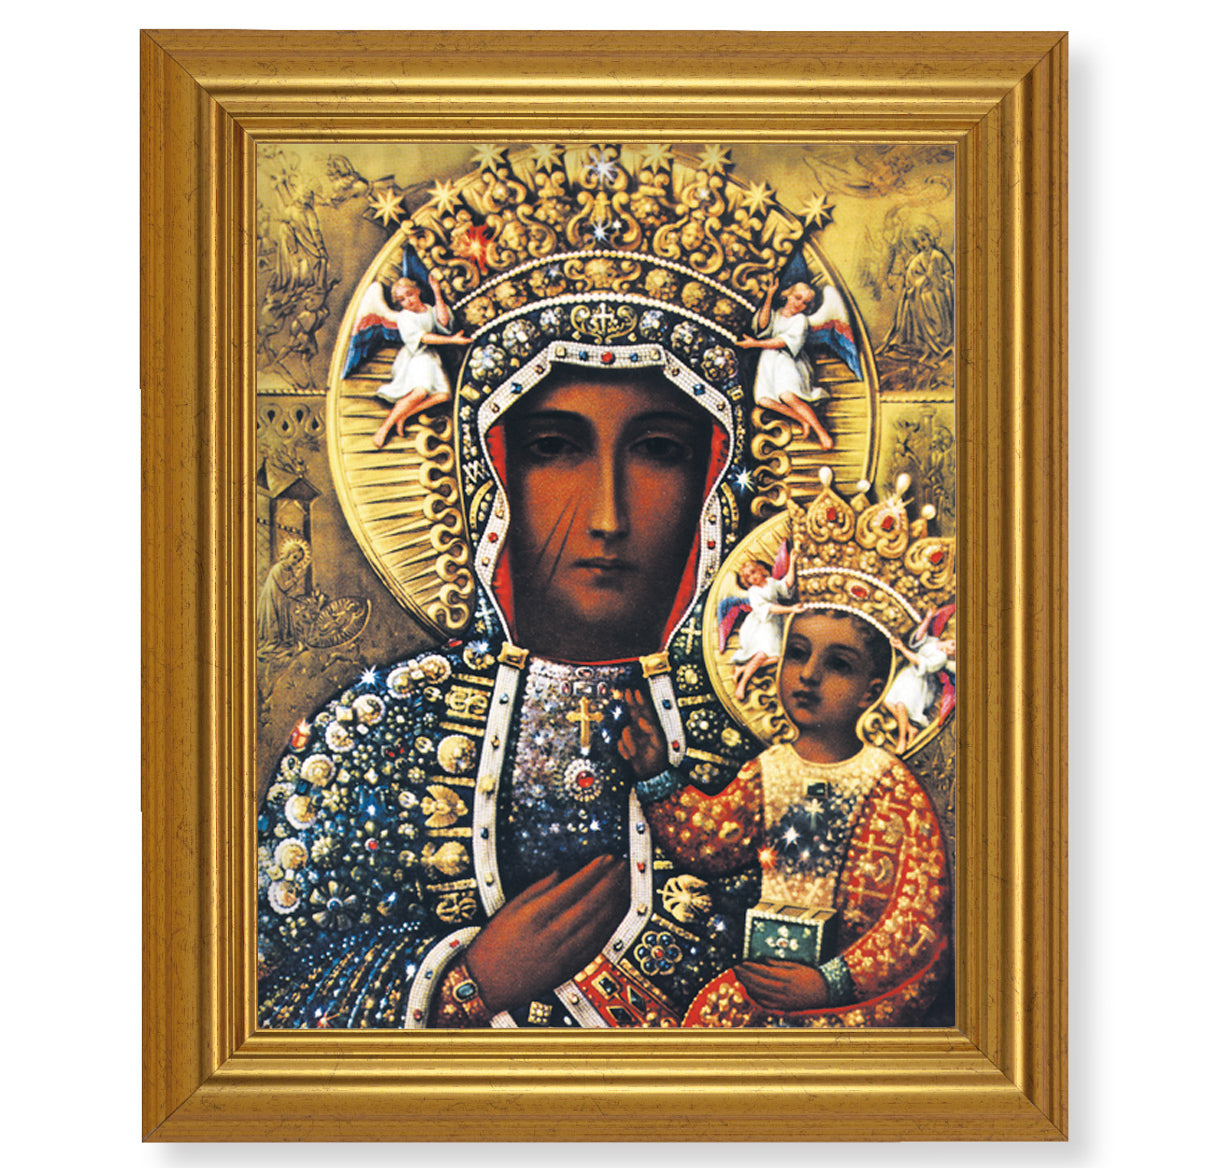 Our Lady of Czestochowa Picture Framed Wall Art Decor, Large, Antique Gold-Leaf Classic Frame